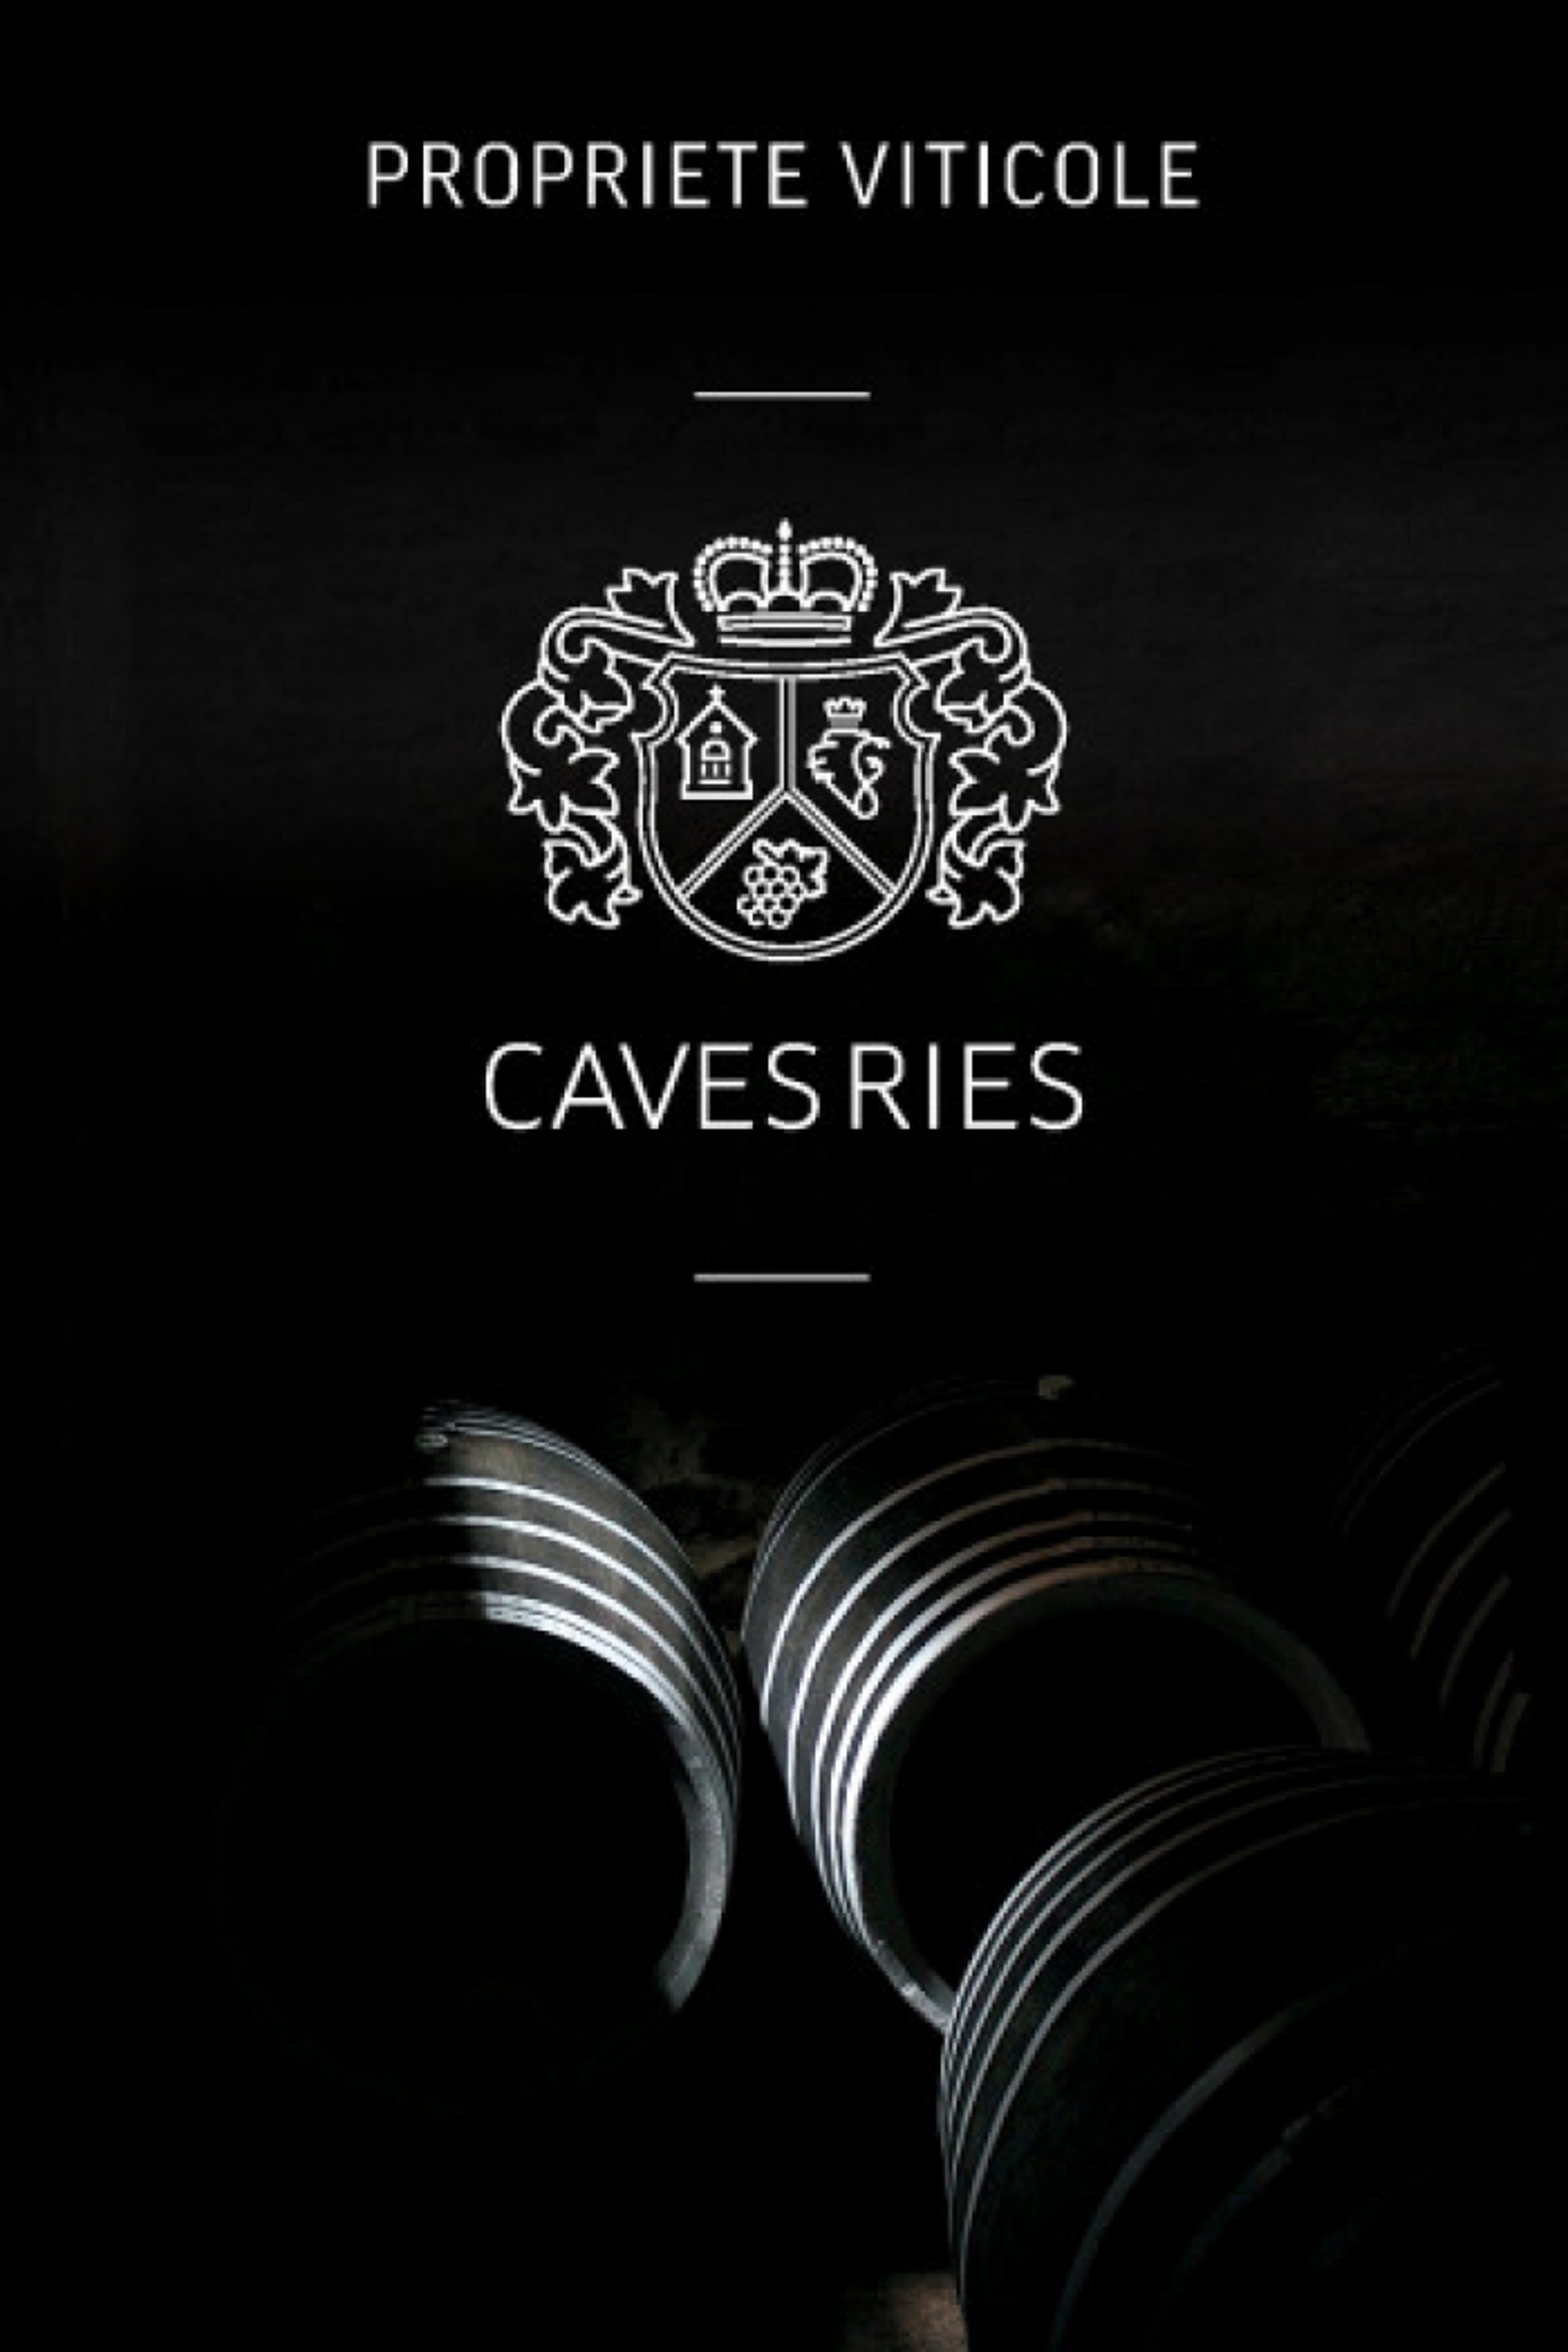 Caves Ries